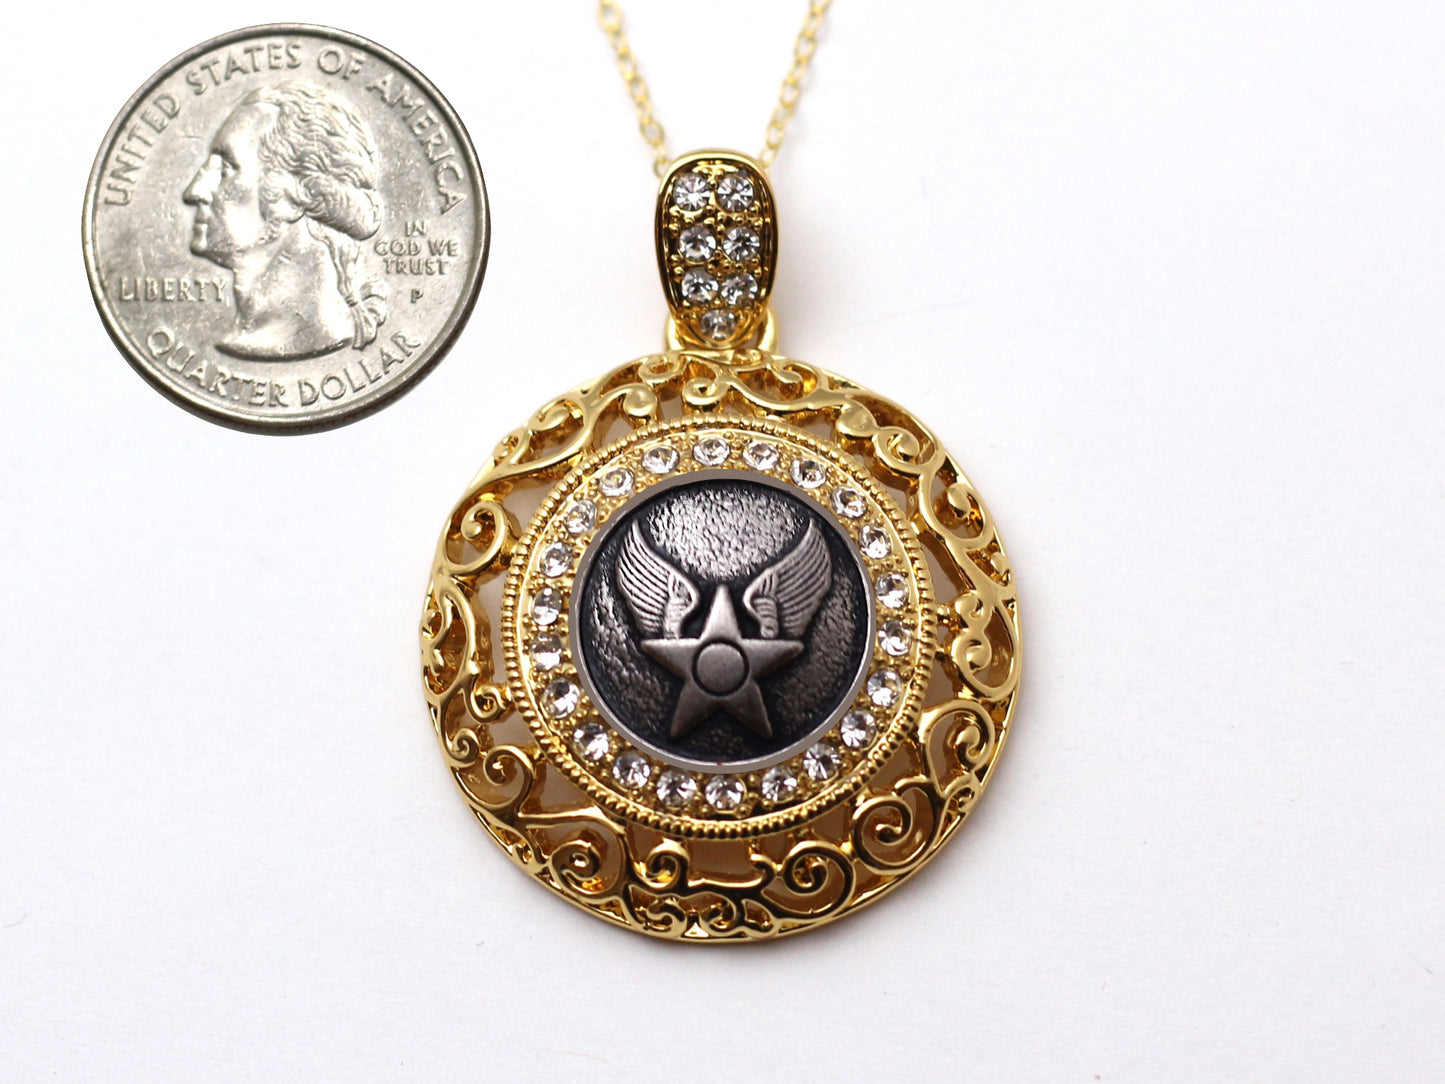 Air Force Button Necklace - Large Gold Rhinestone Pendant